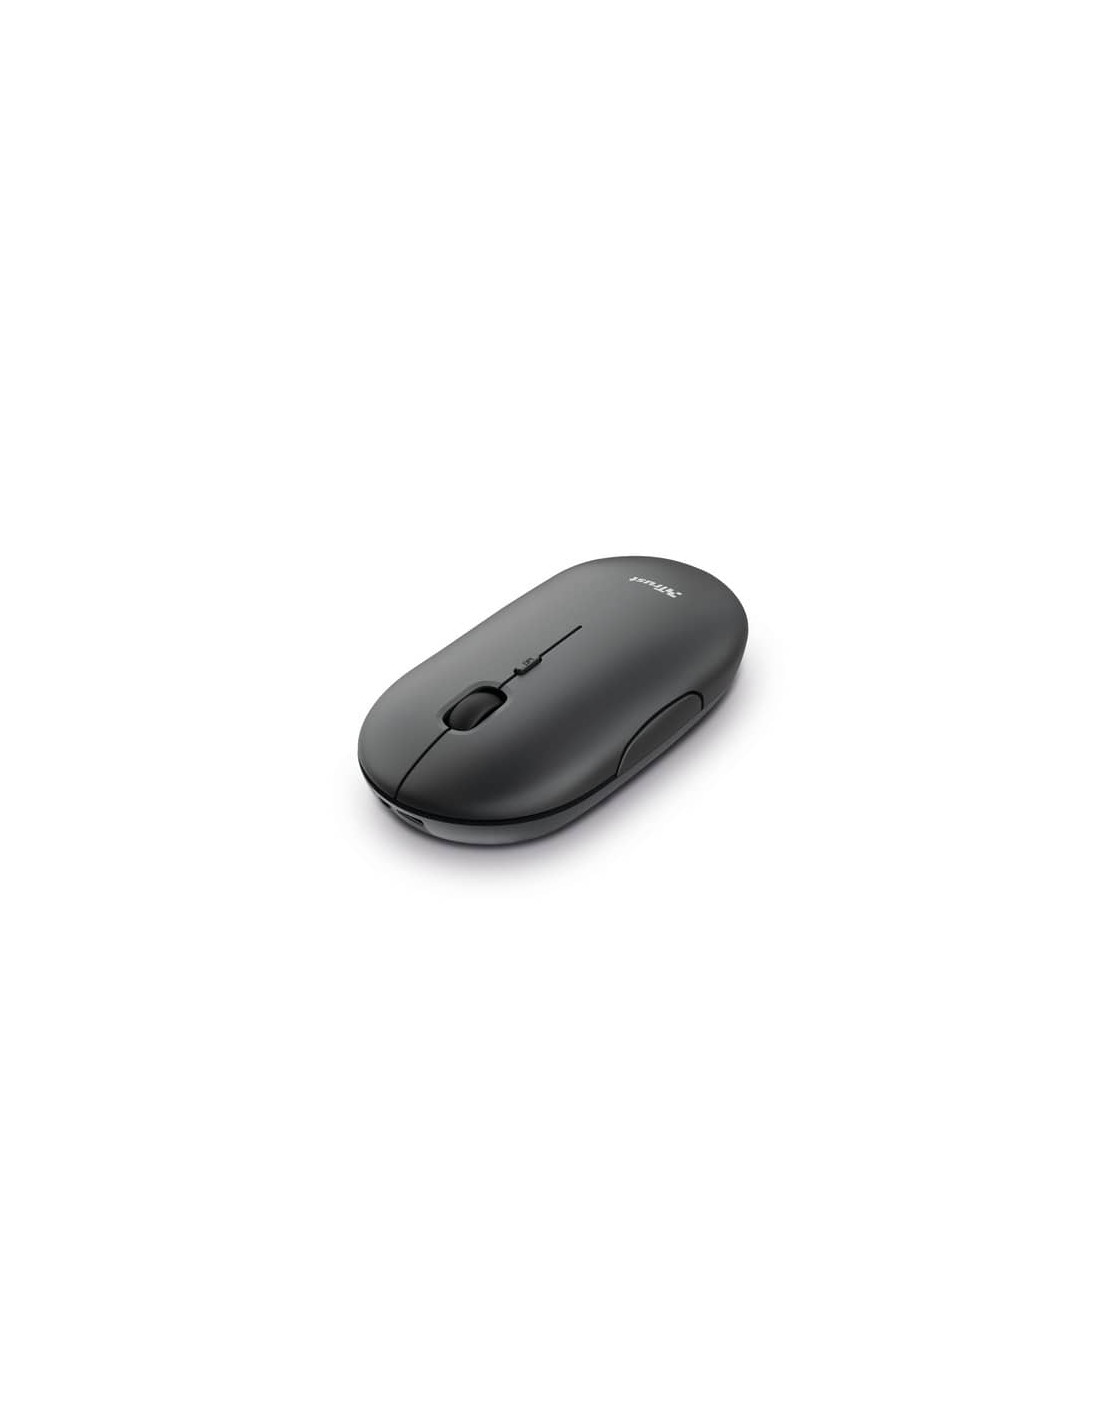 Mouse ultrasottile wireless ricaricabile Trust Puck h. 2,7 cm - ricevitore  USB A 2.0 nero - 24059